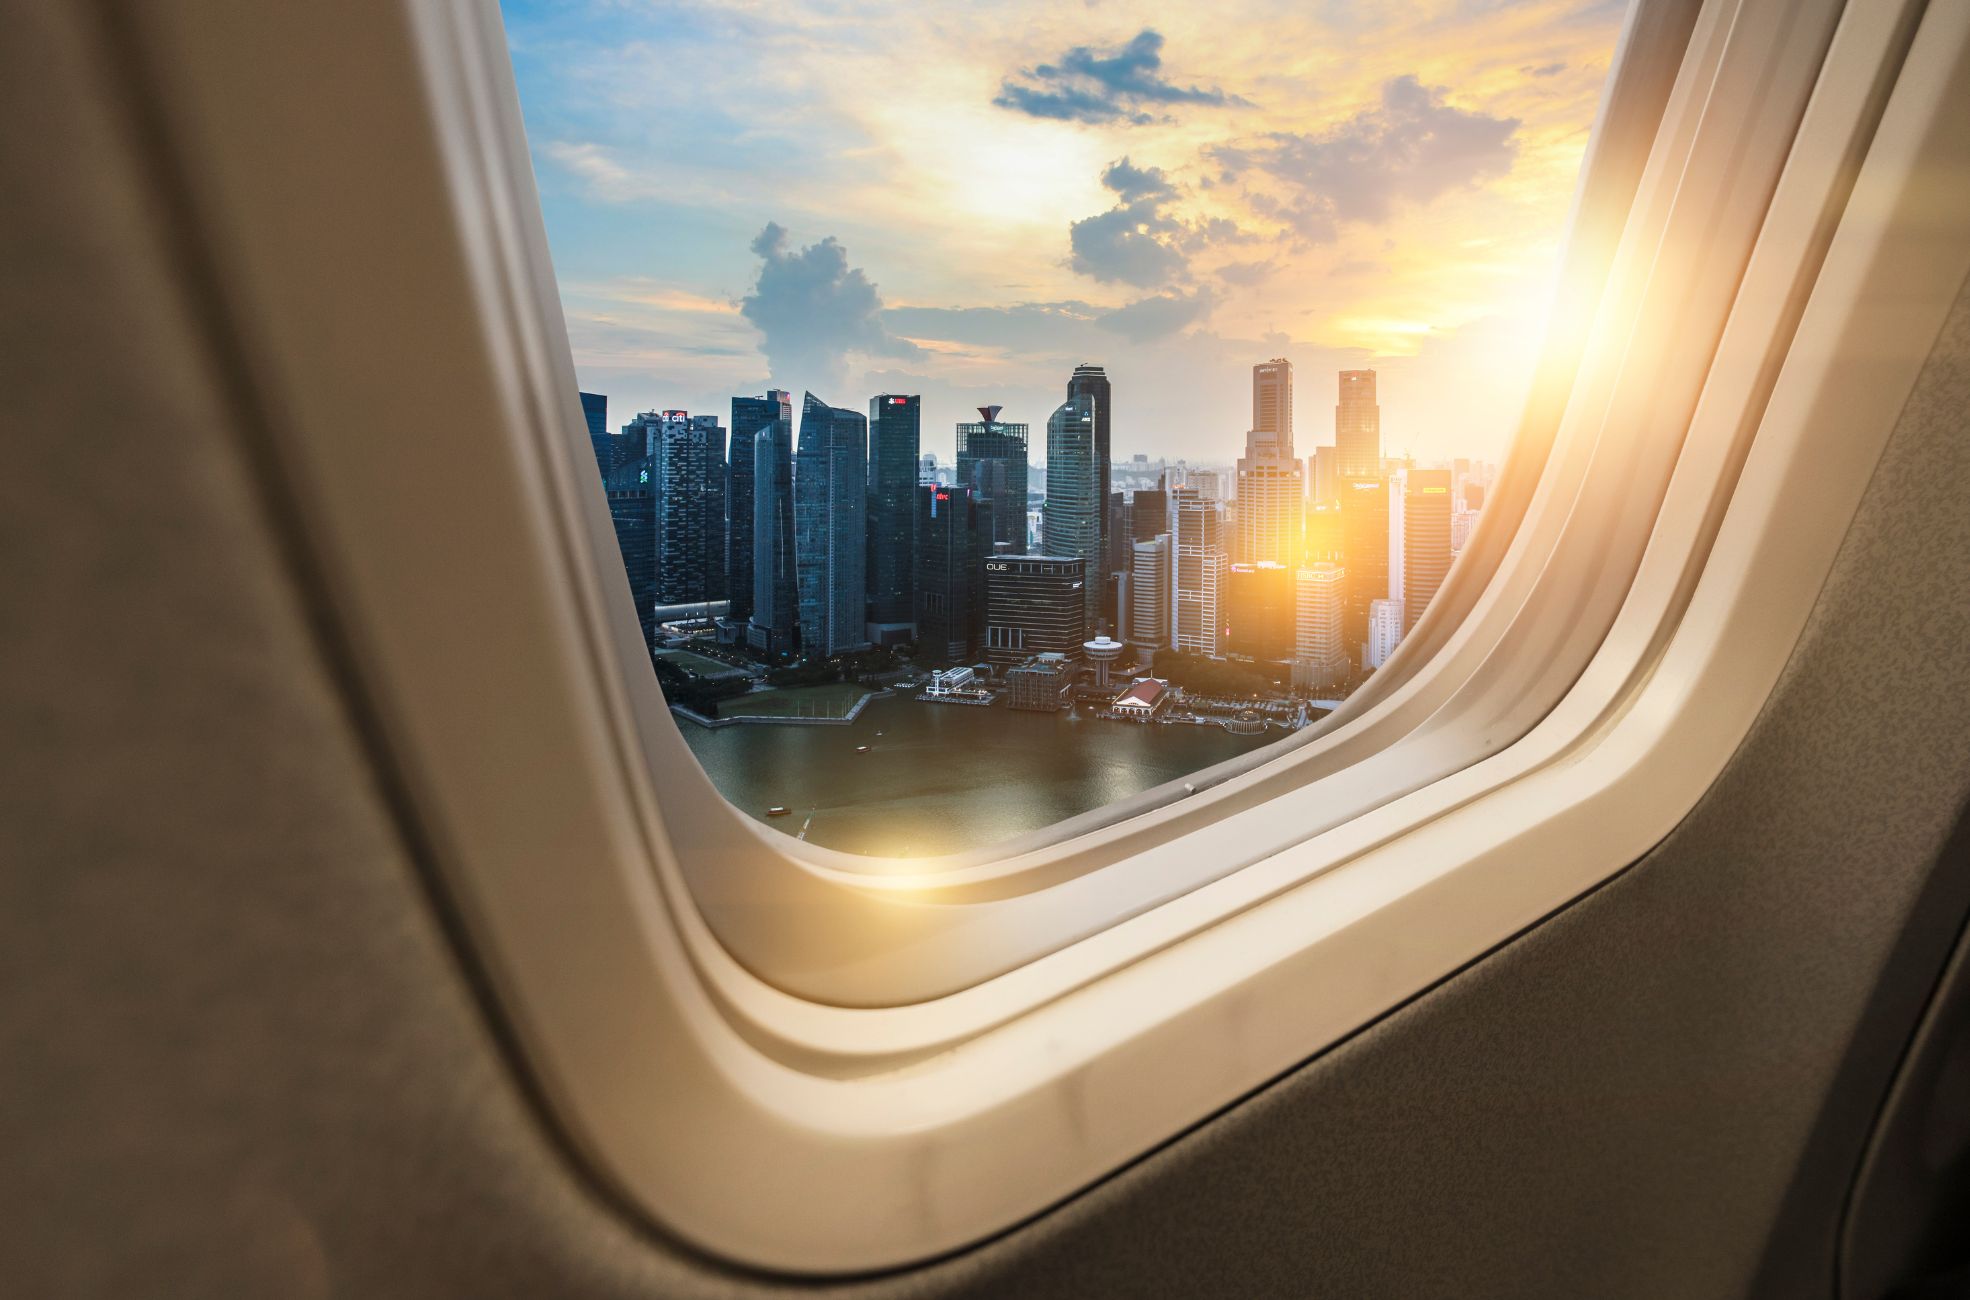 Airplane Window With City View